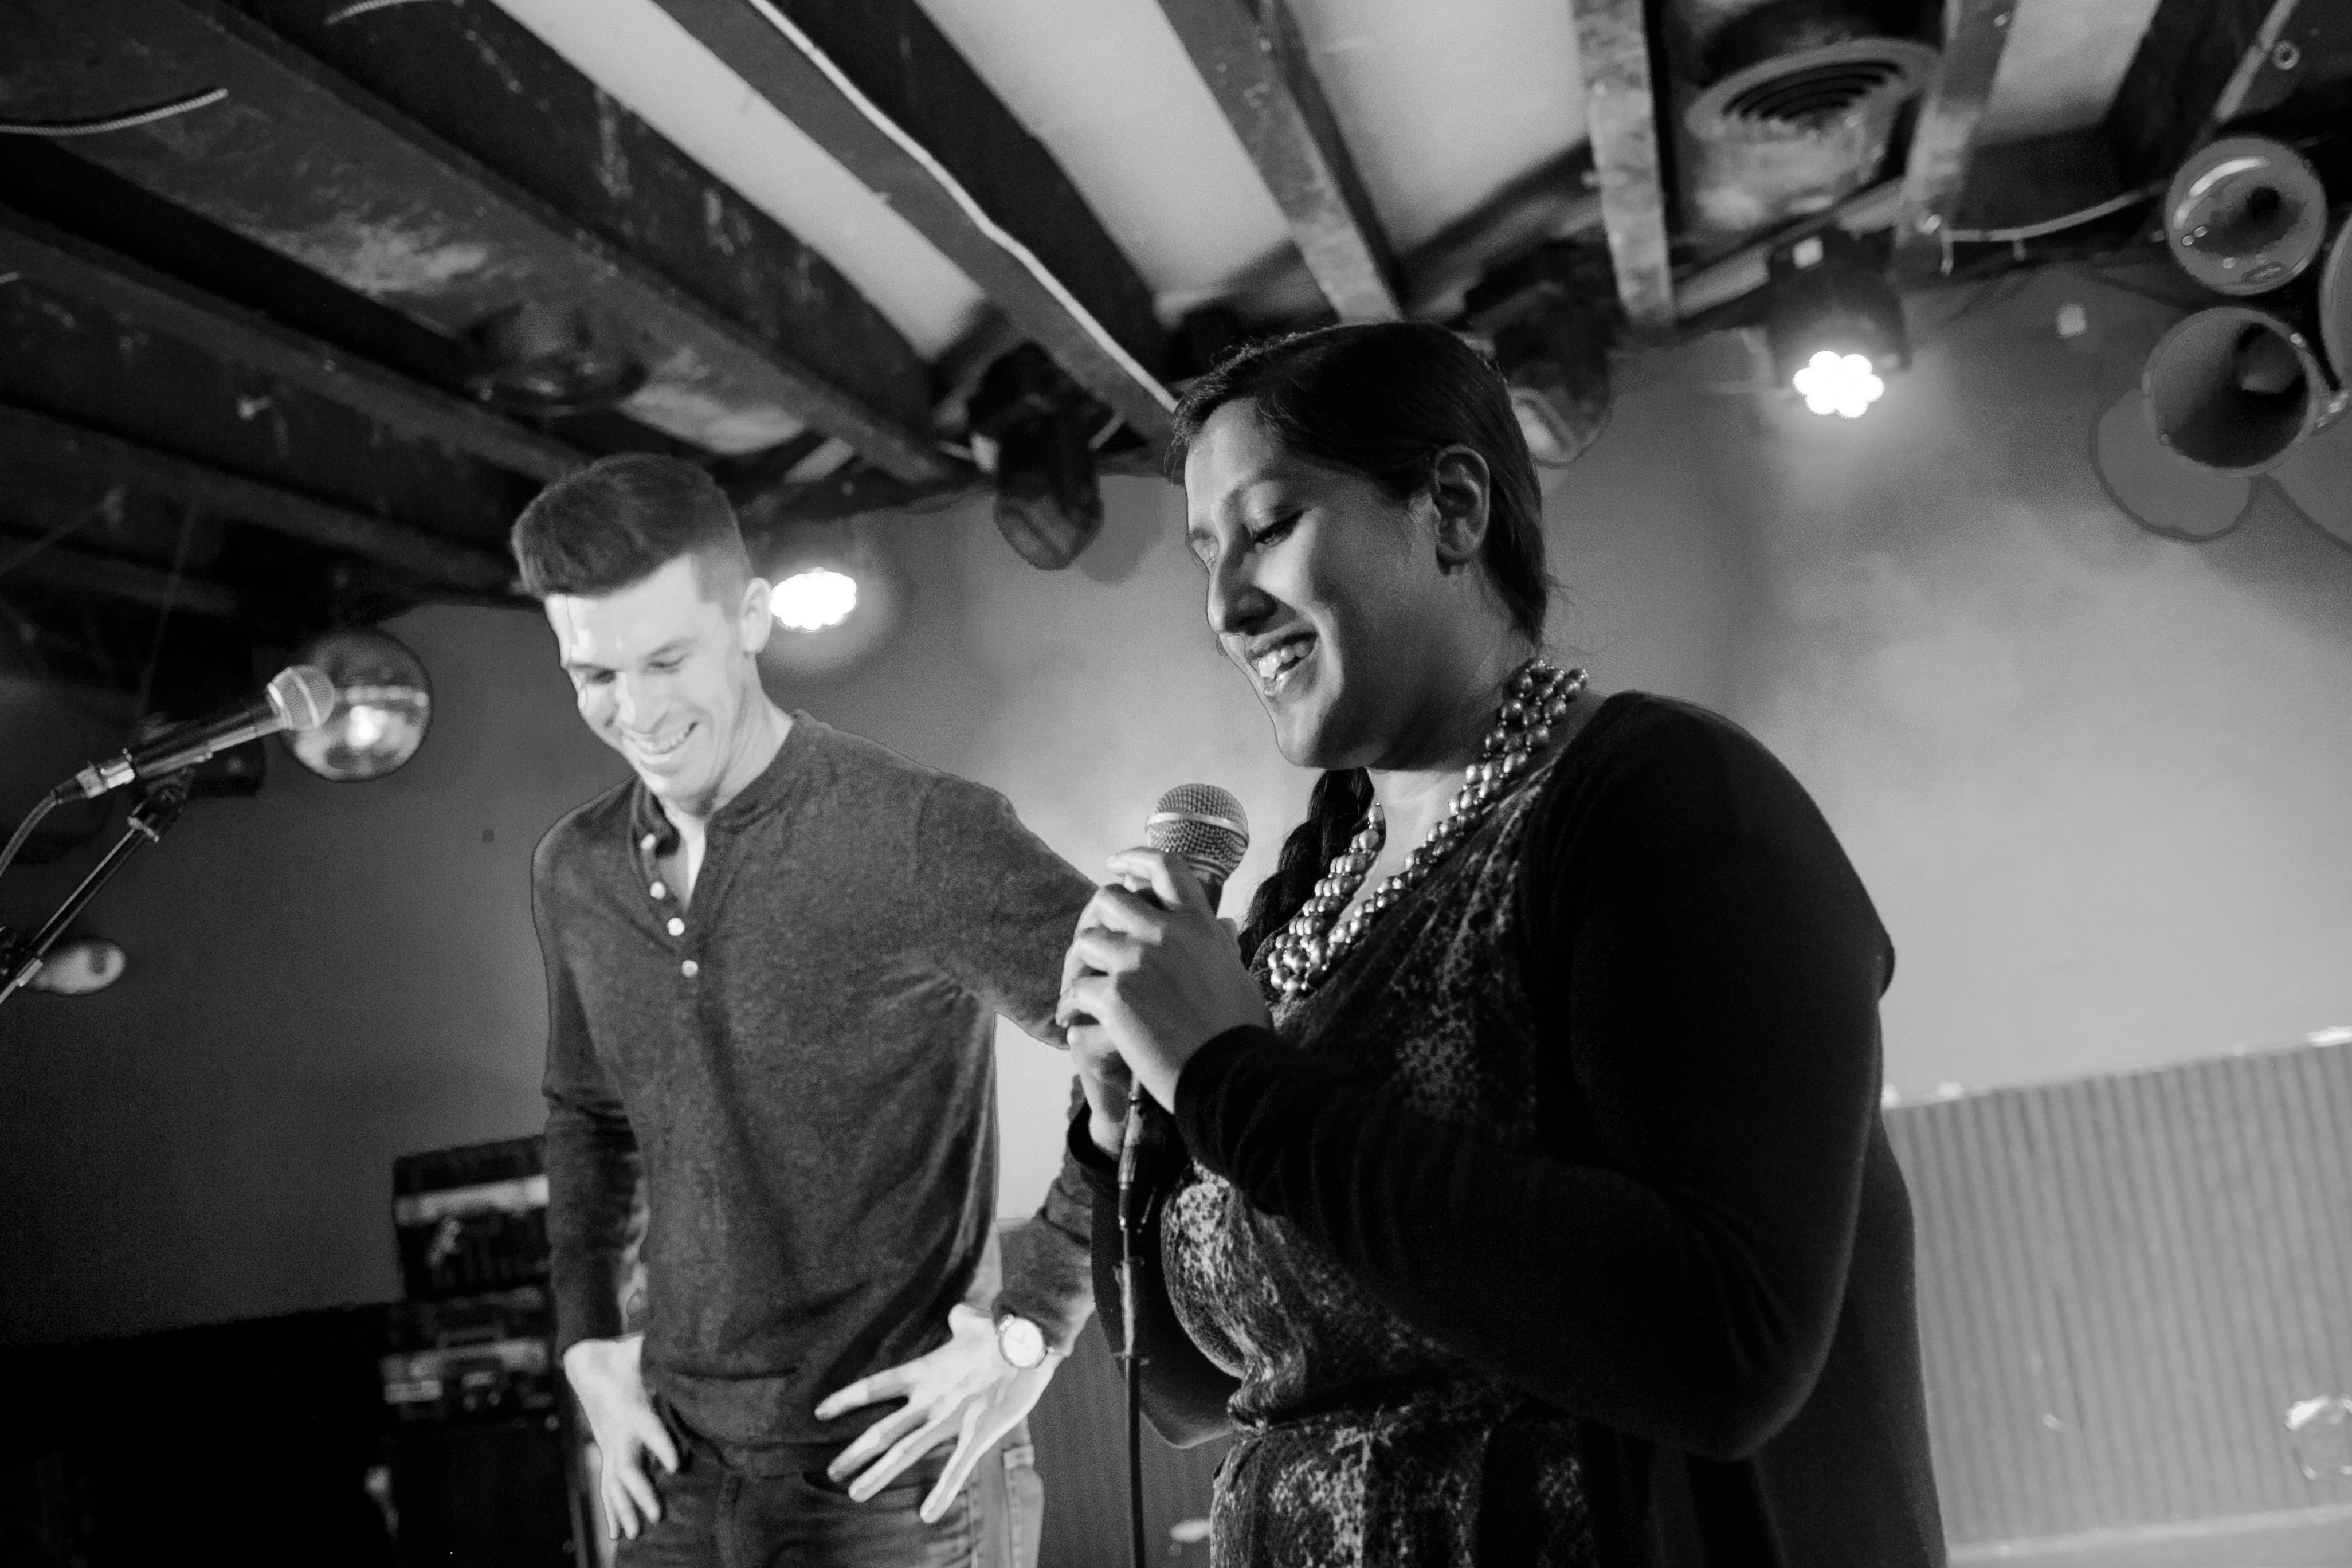 Me & co-host Farah Ahmad at The Story Collider last month in DC.